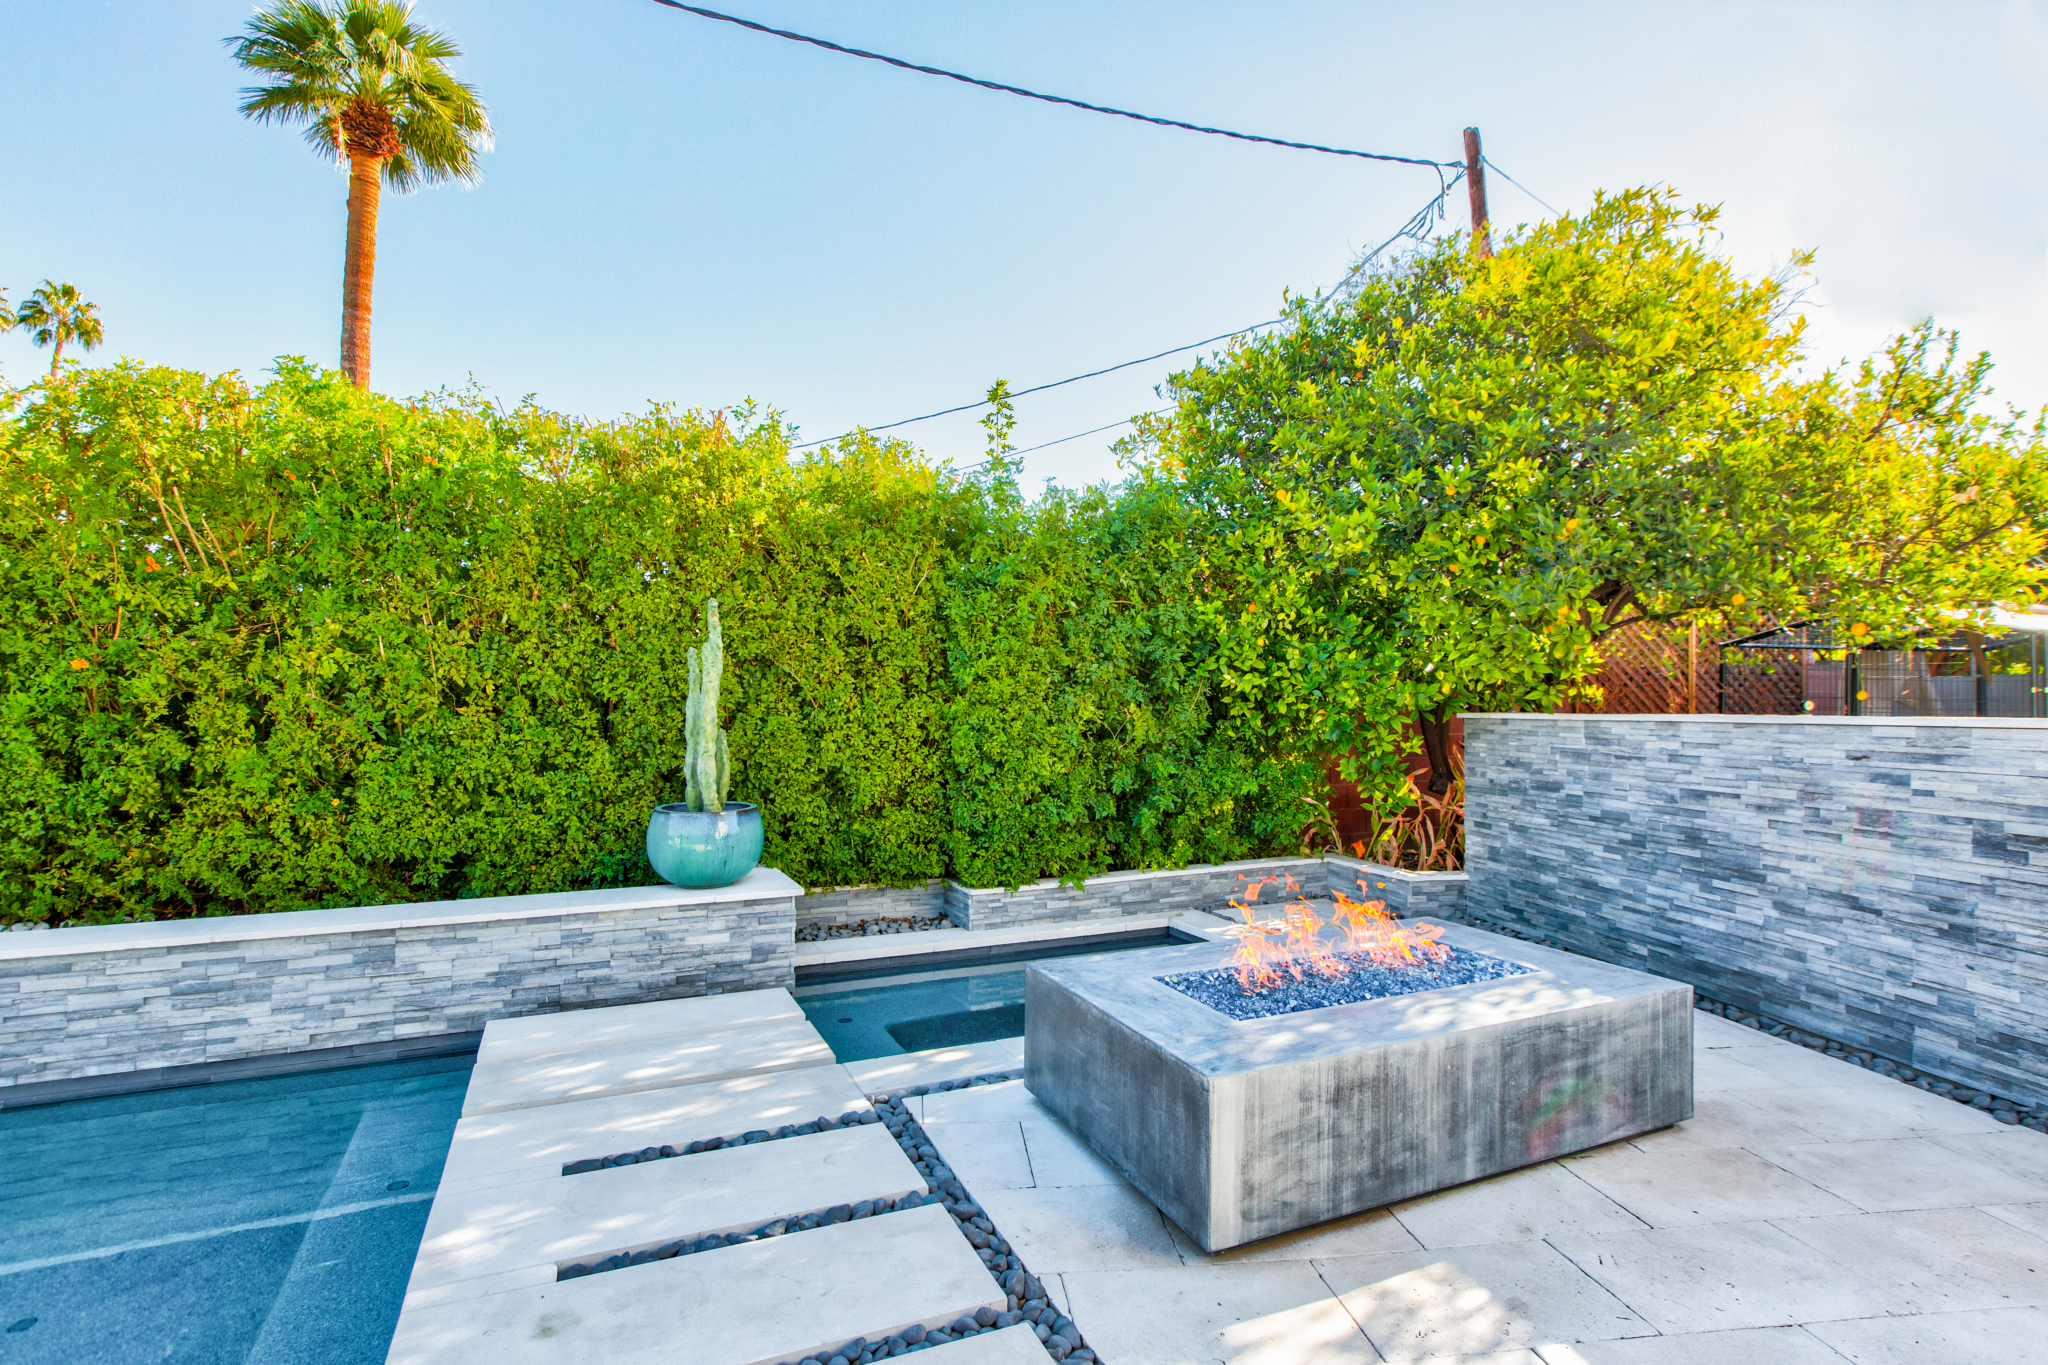 Outdoor hot tub and fire pit photo for real estate listing by Remethod.